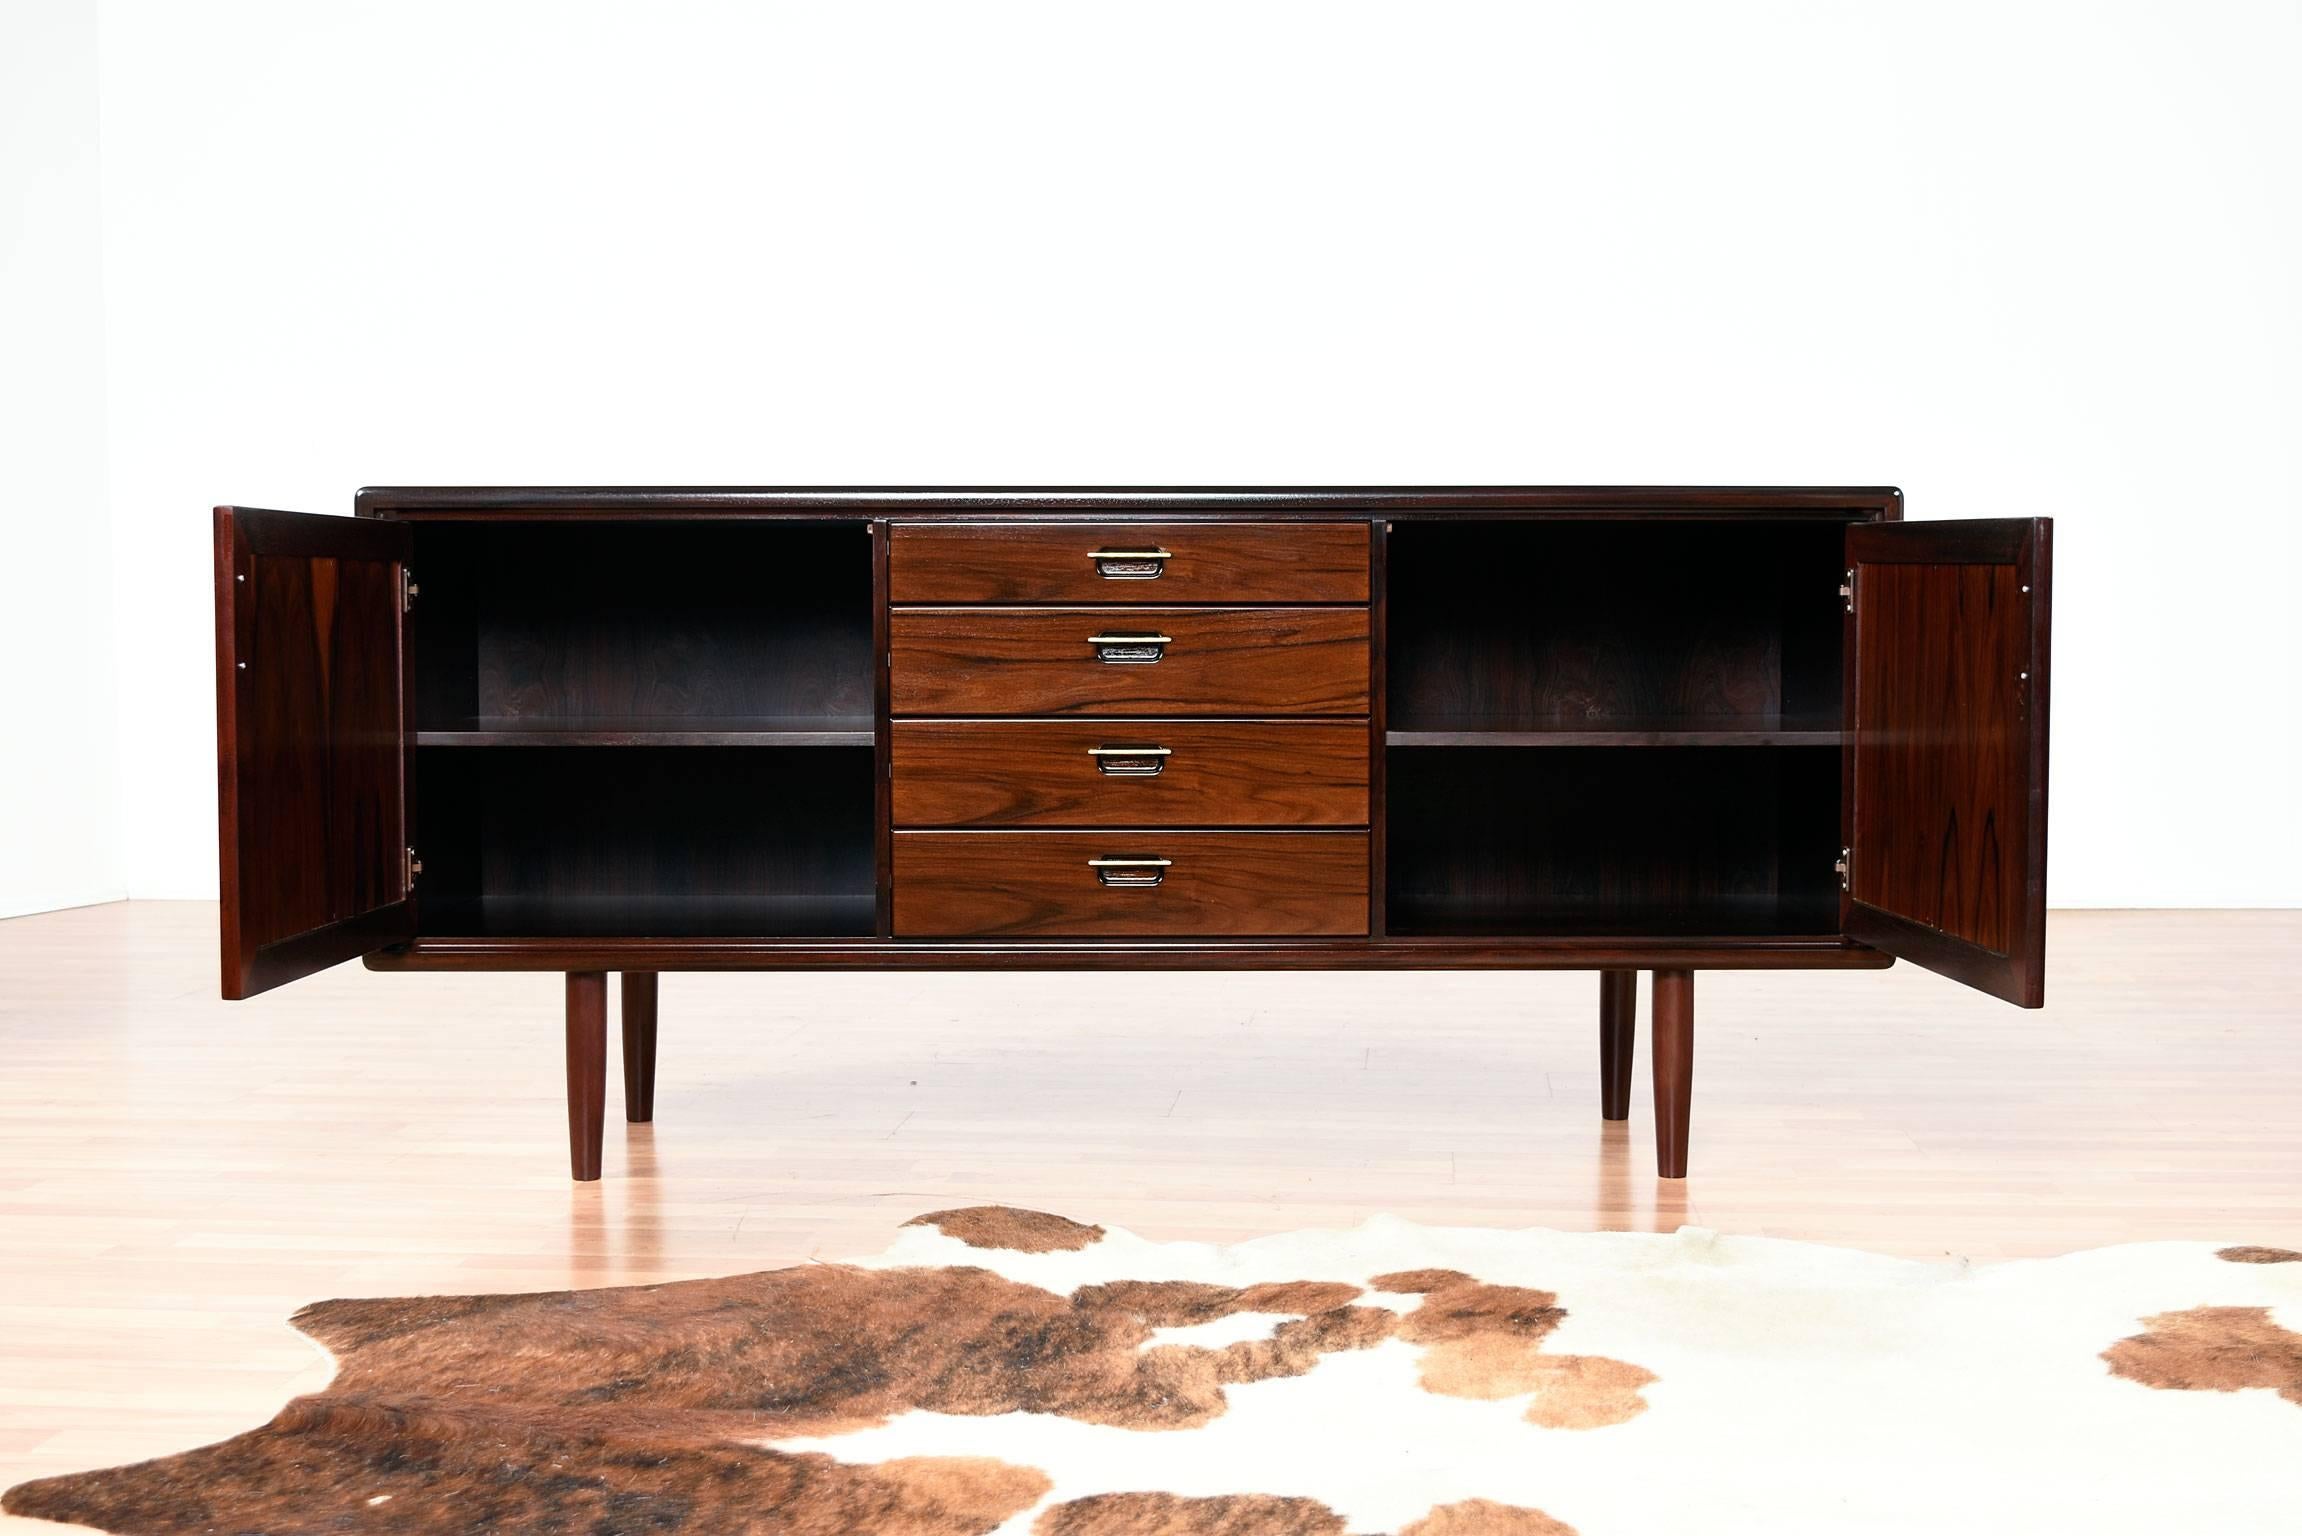 Stunning vintage rosewood credenza made in Scandinavia. This piece is a sight to behold in person. The wood is a rich black cherry color with elegant contrasts of lights and dark in the grain. The clean lines of the Danish Modern work to enhance the